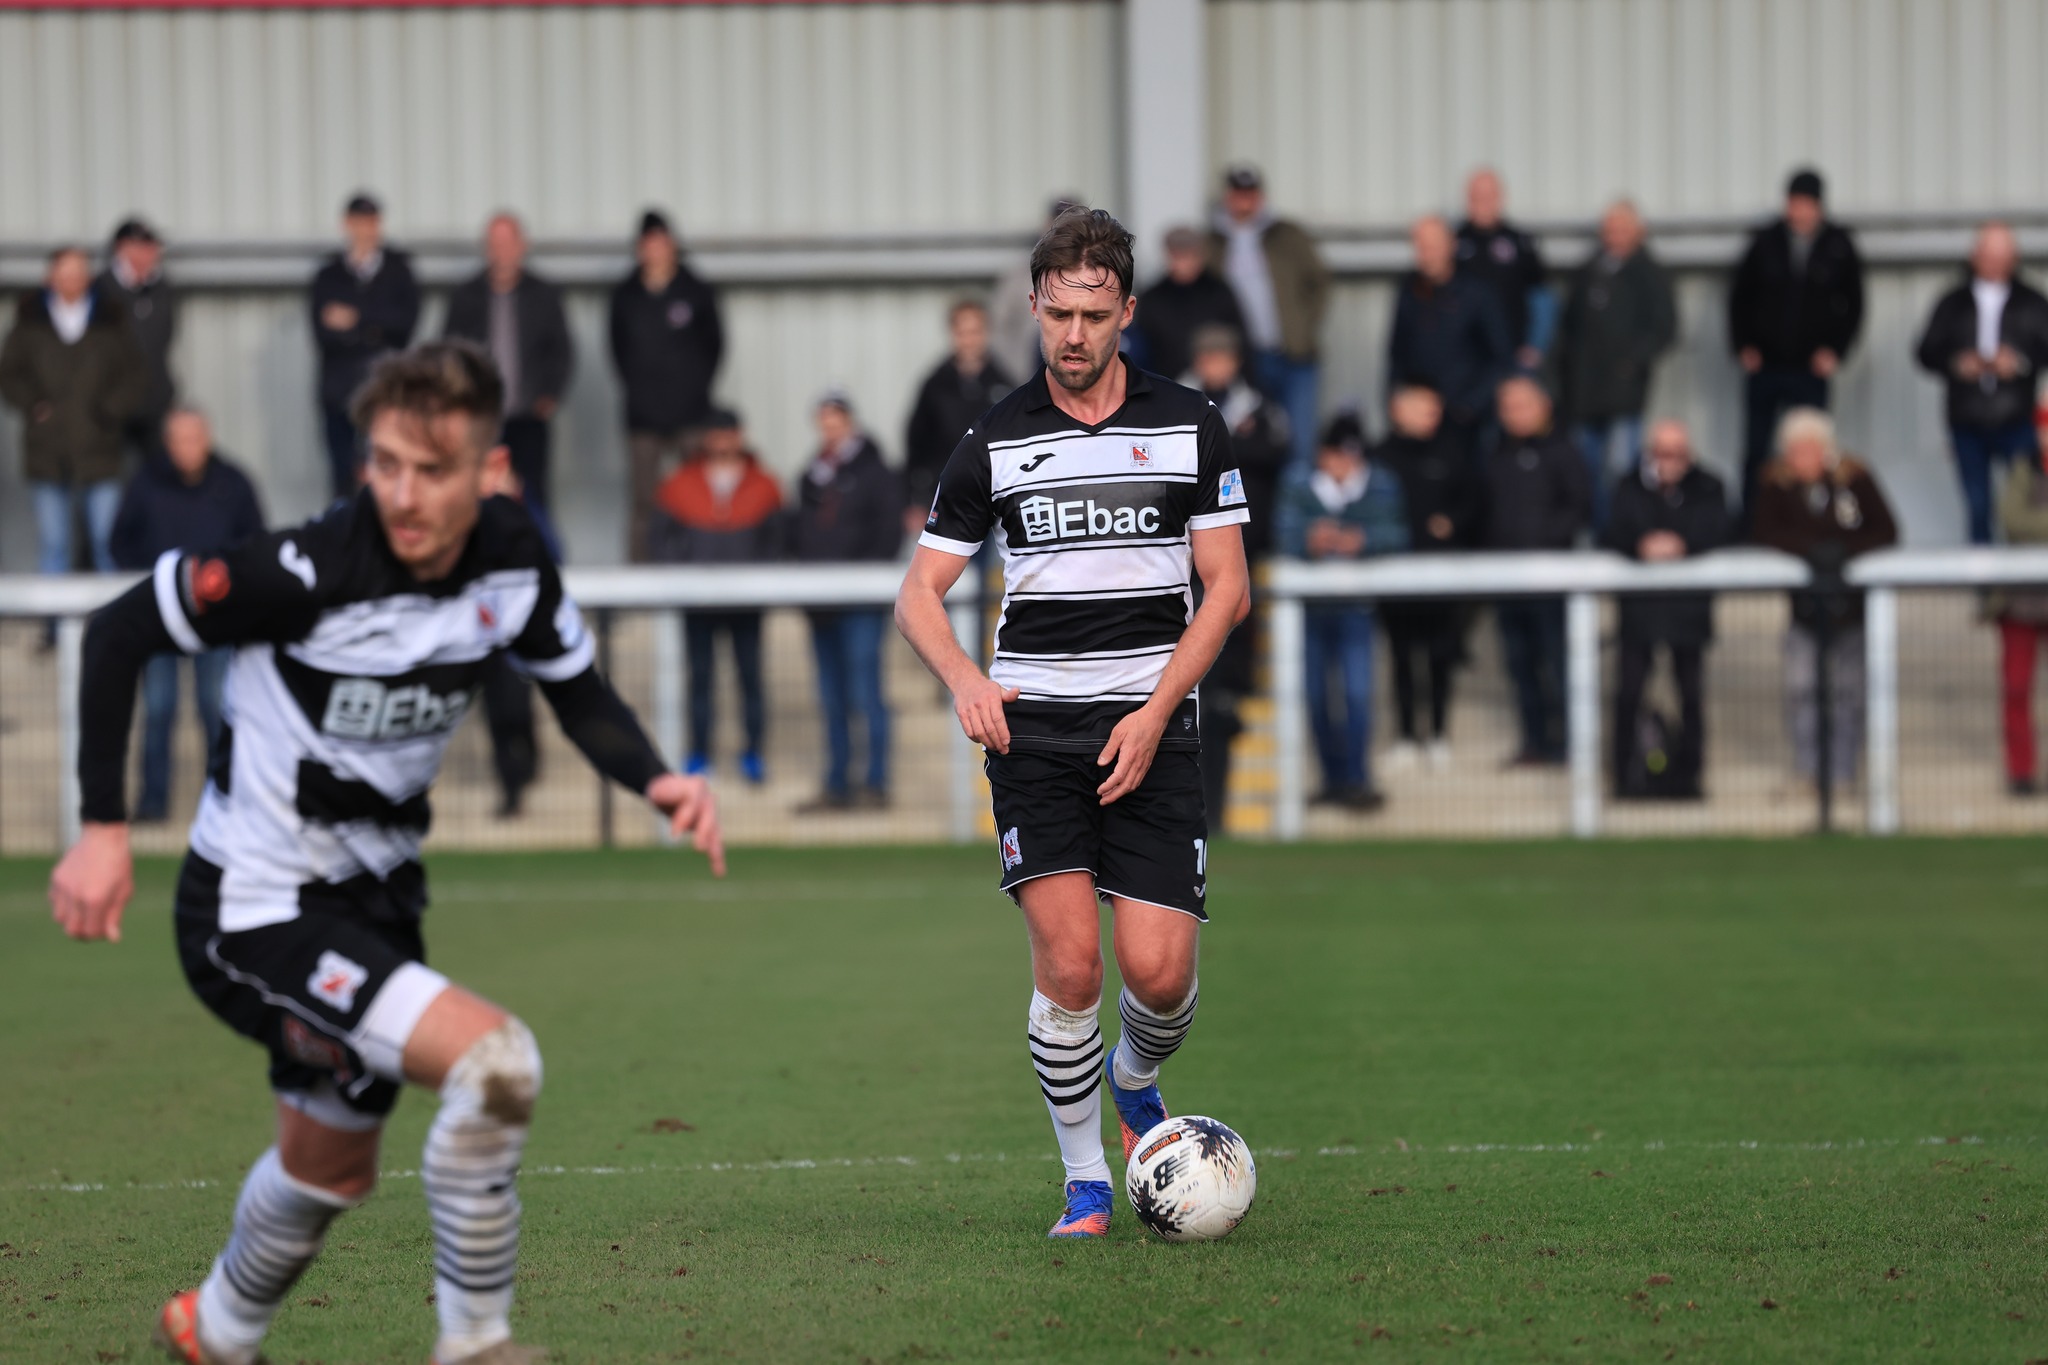 Scott Barrow: 'I want to sign for Darlo'